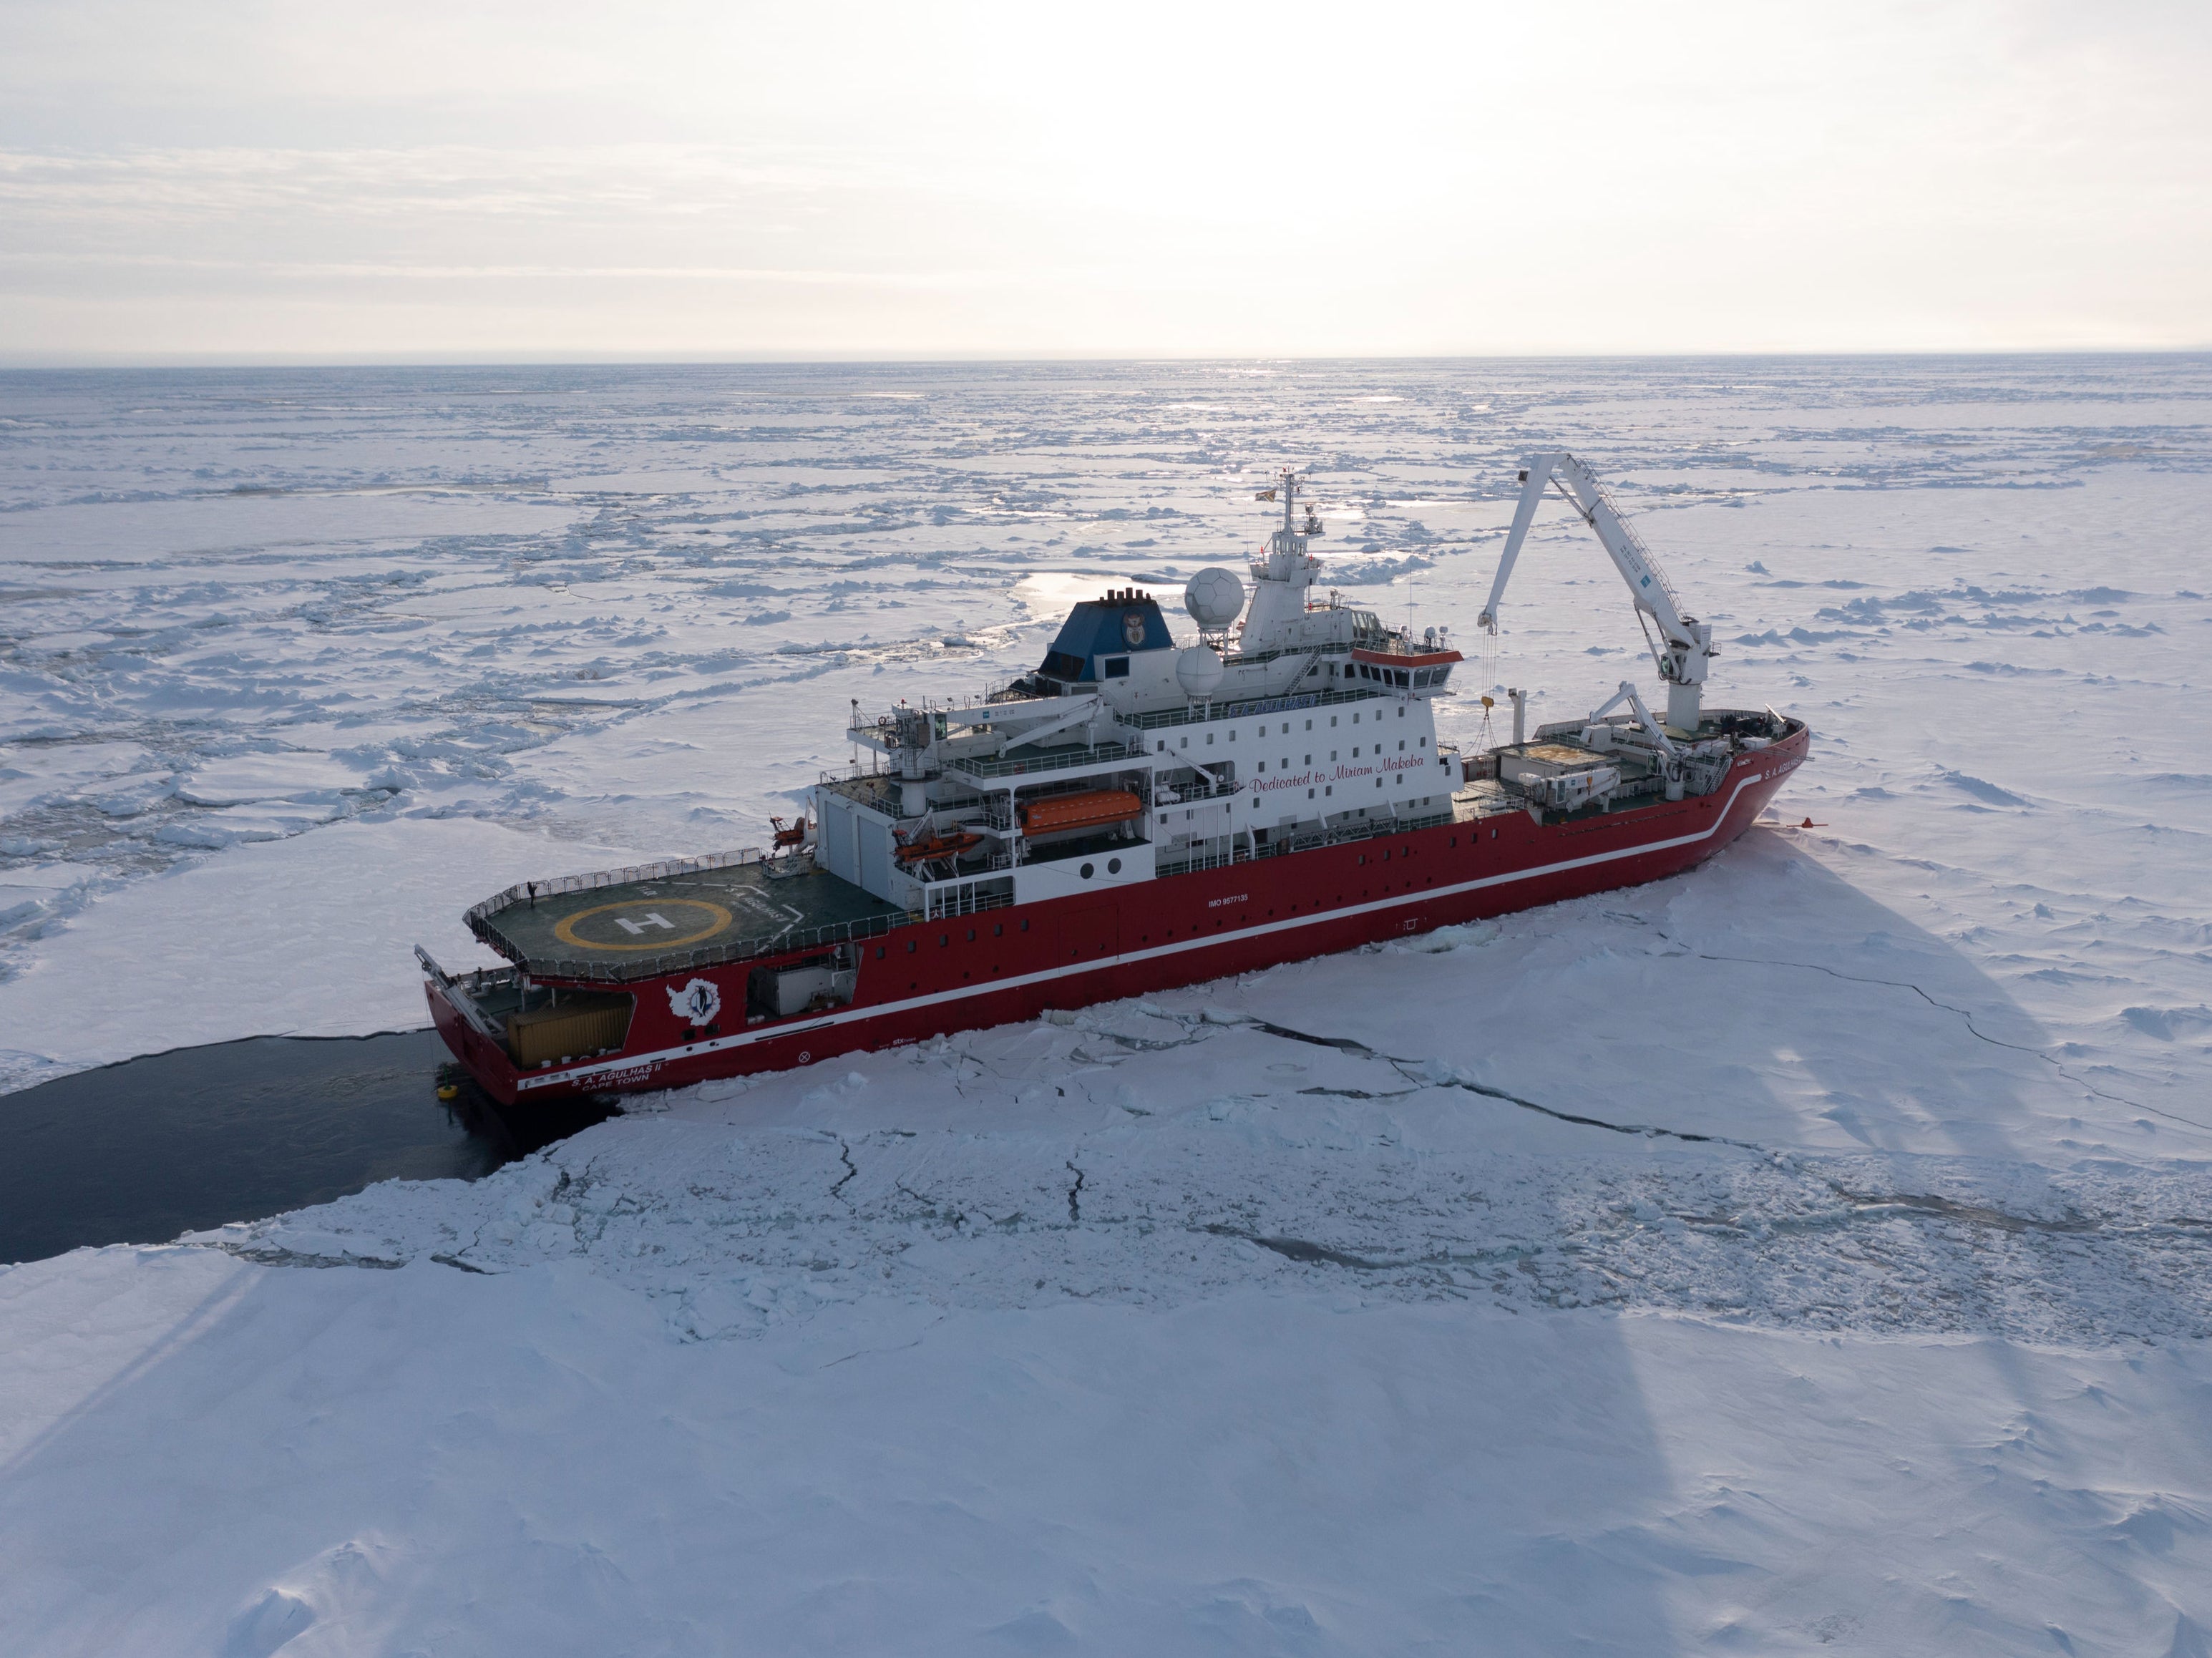 Polar research vessel SA Agulhas II on the expedition to find the wreck of Endurance